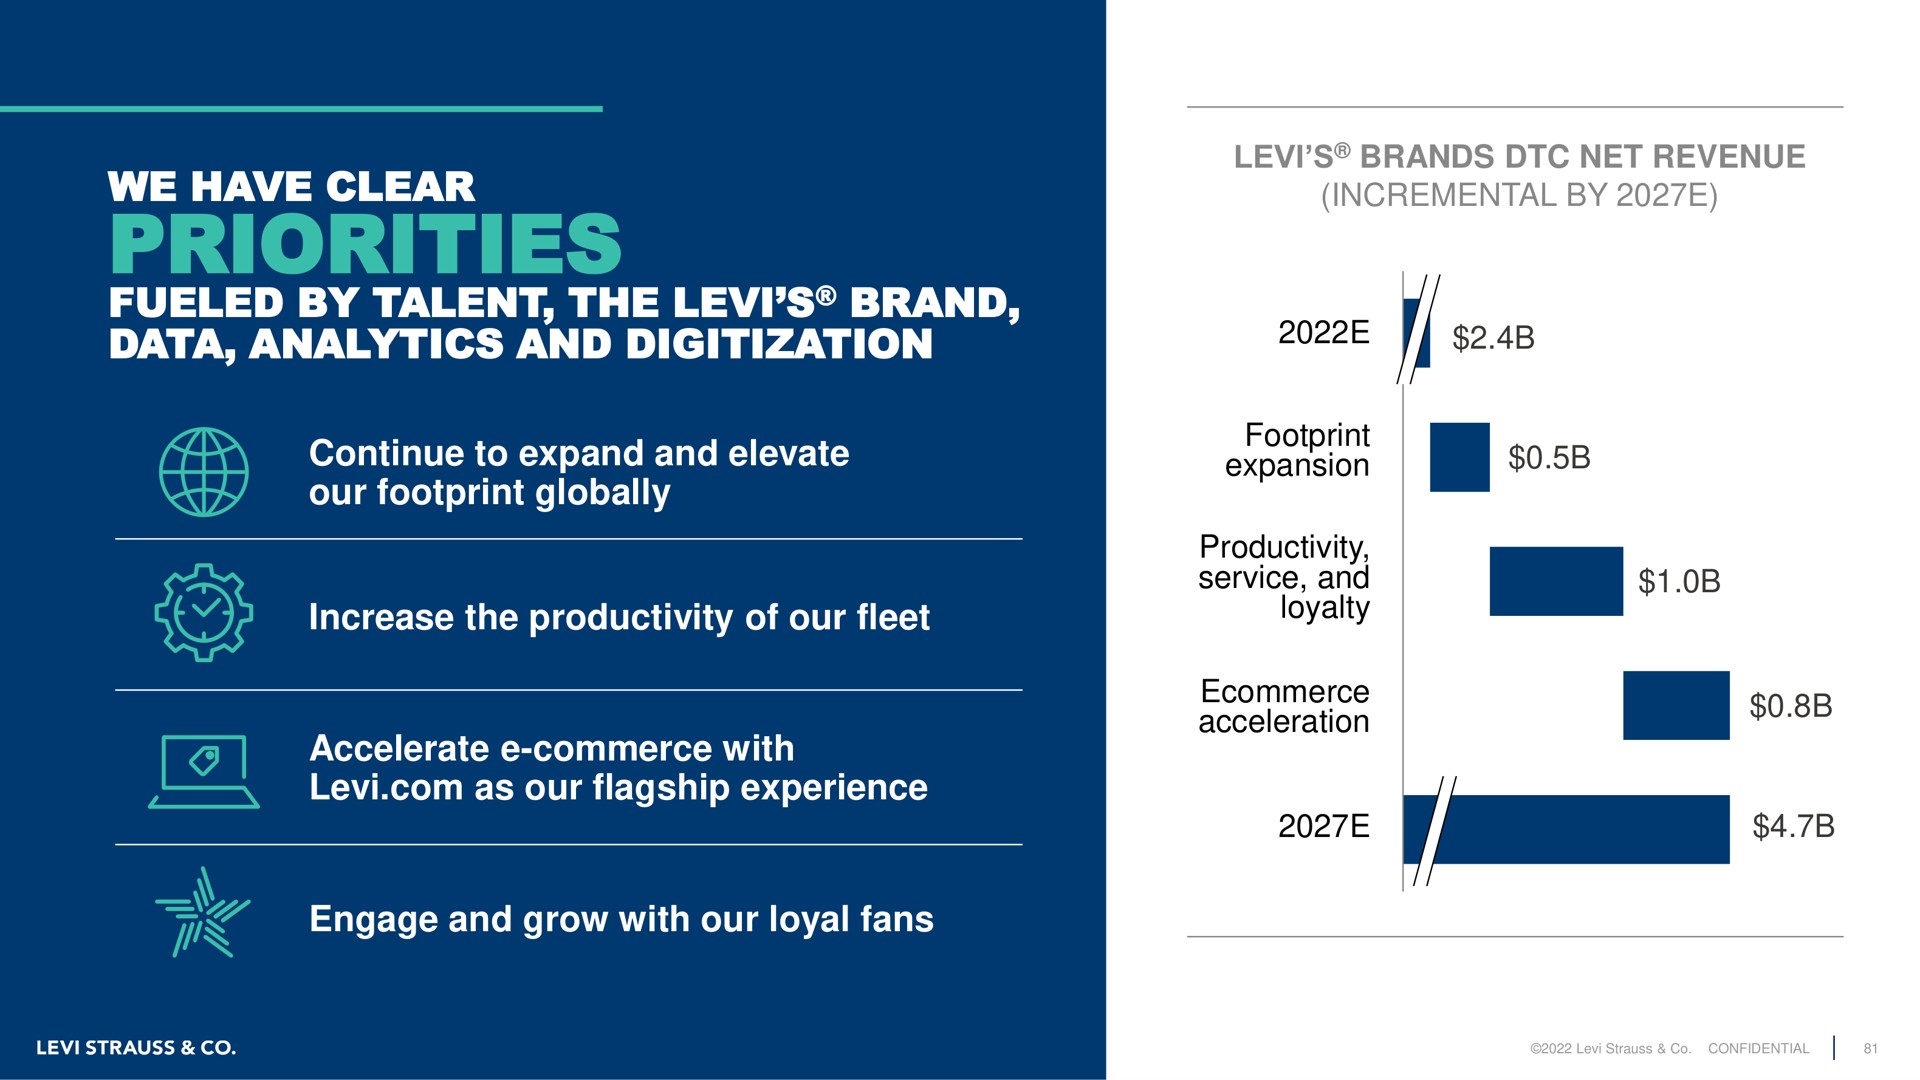 we have clear priorities fueled by talent the brand data analytics and blah was brands net revenue incremental arid continue to expand elevate our footprint globally increase productivity of our fleet accelerate commerce with as our flagship experience engage grow with our loyal fans expansion loyalty | Levi Strauss